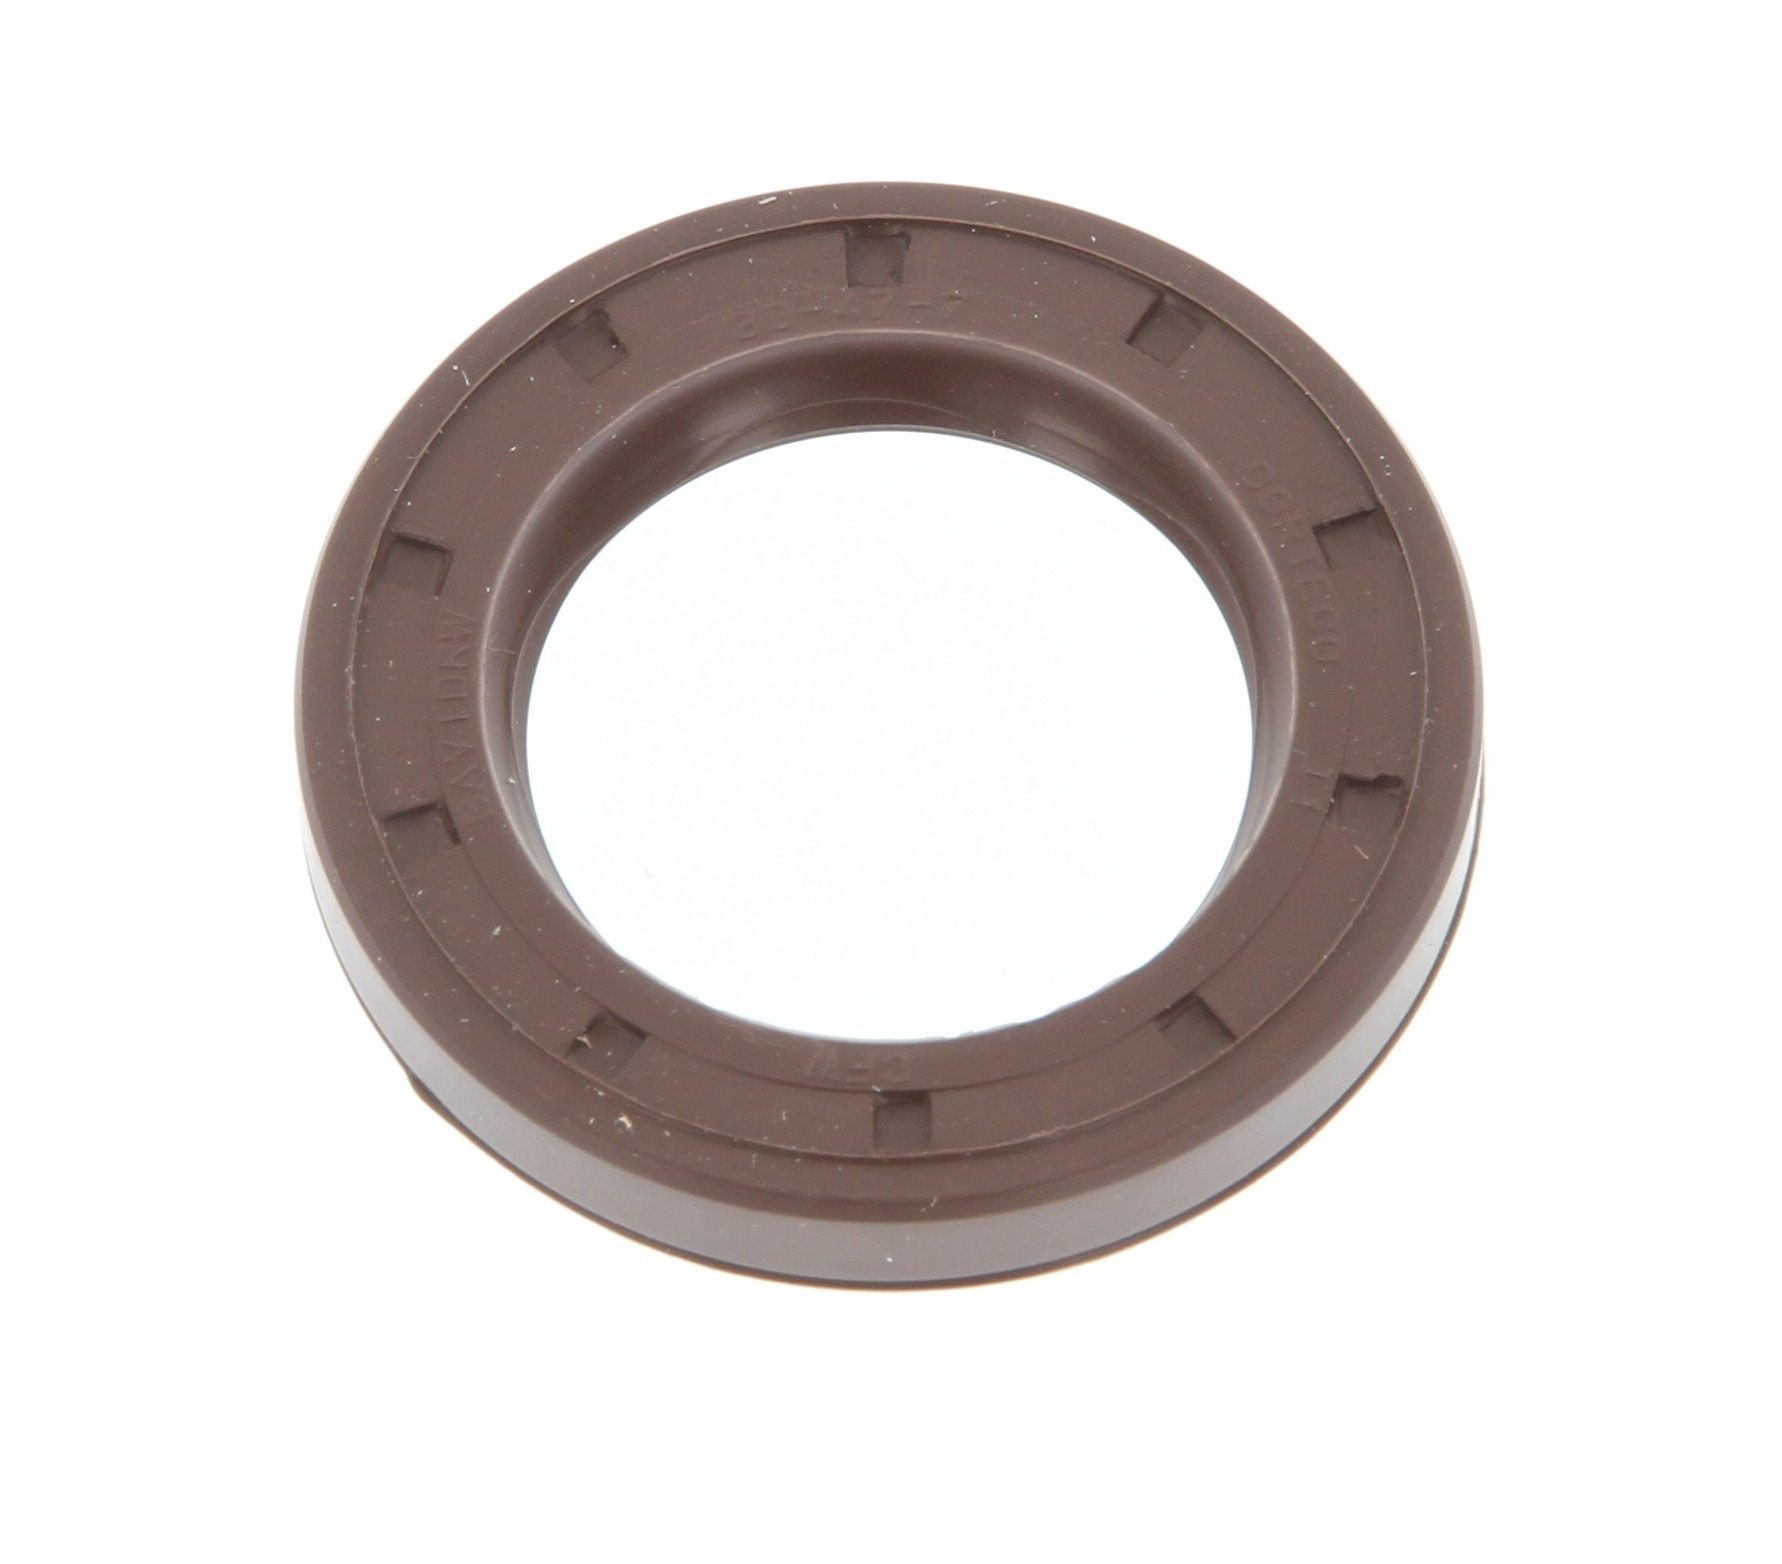 Ford MONDEO Camshaft oil seal 2093138 CORTECO 12001192B online buy